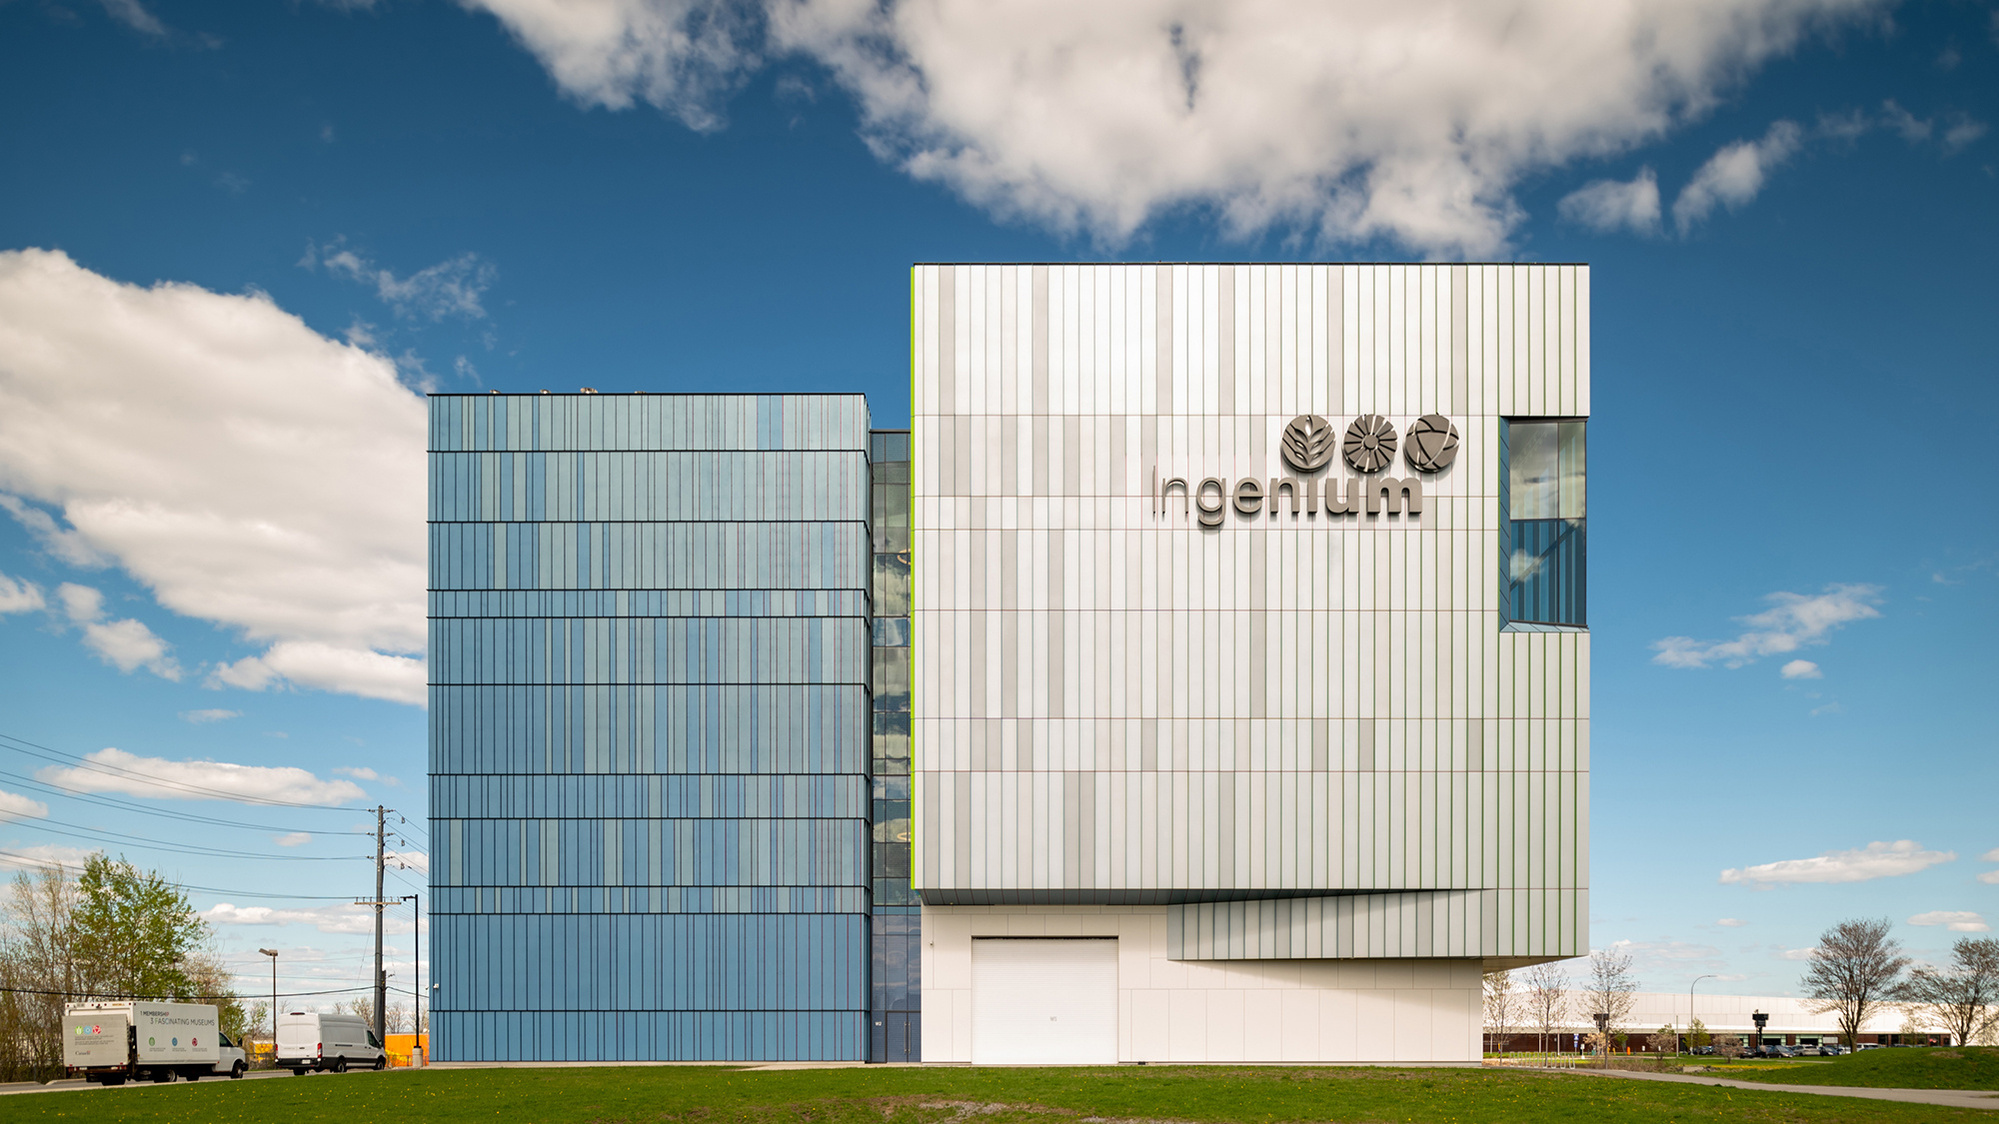 Ingenium building at Museum of Science and Technology by Frank Fenn Architectural Photographer in Ottawa Ontario Canada
